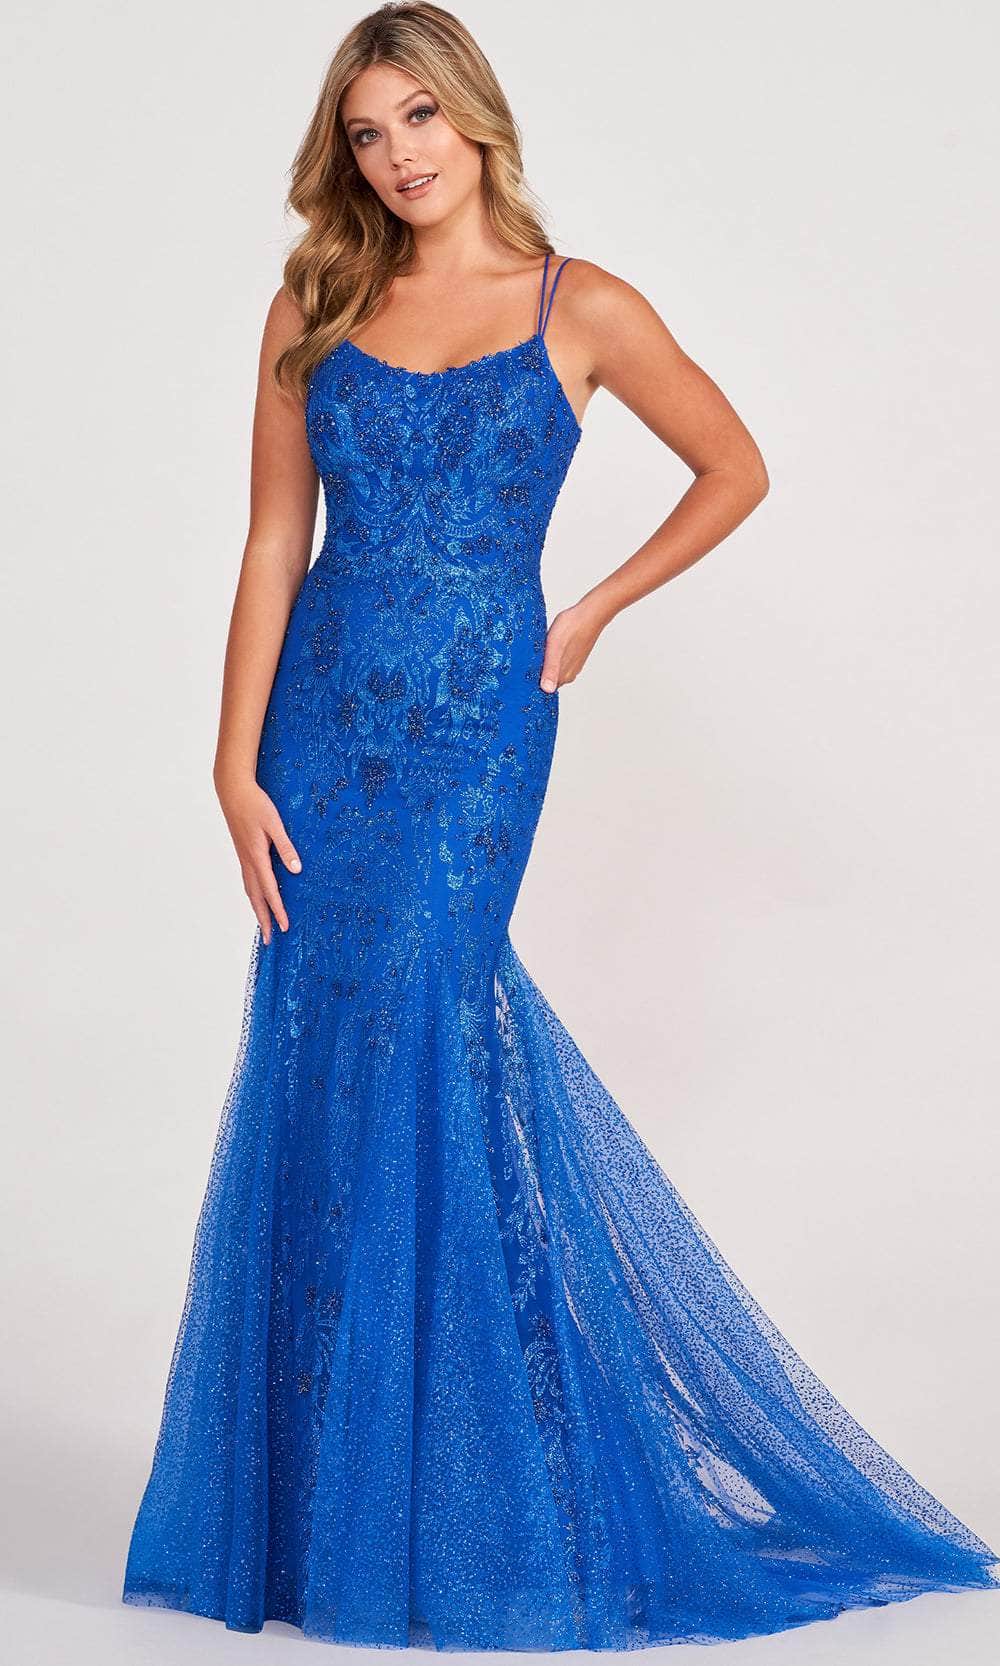 Ellie Wilde EW34045 - Scoop Neck Sequin Prom Gown Prom Dresses 00 / Royal Blue